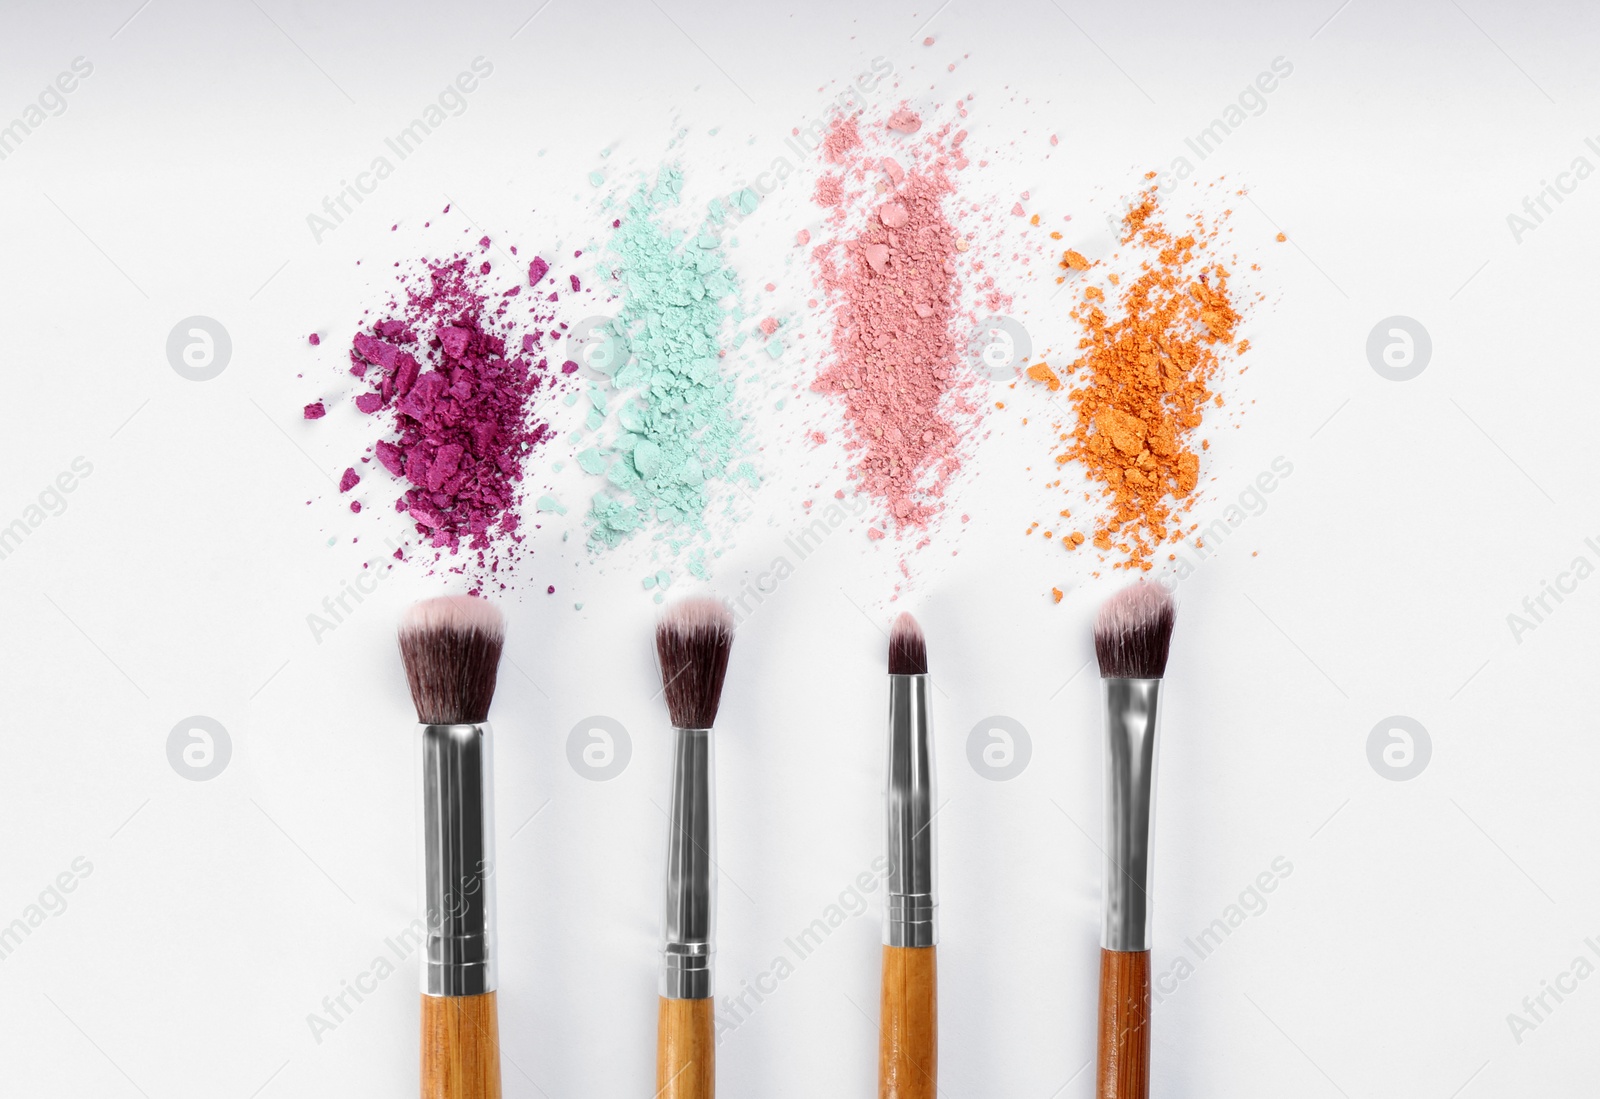 Photo of Makeup brushes and scattered eye shadows on white background, flat lay